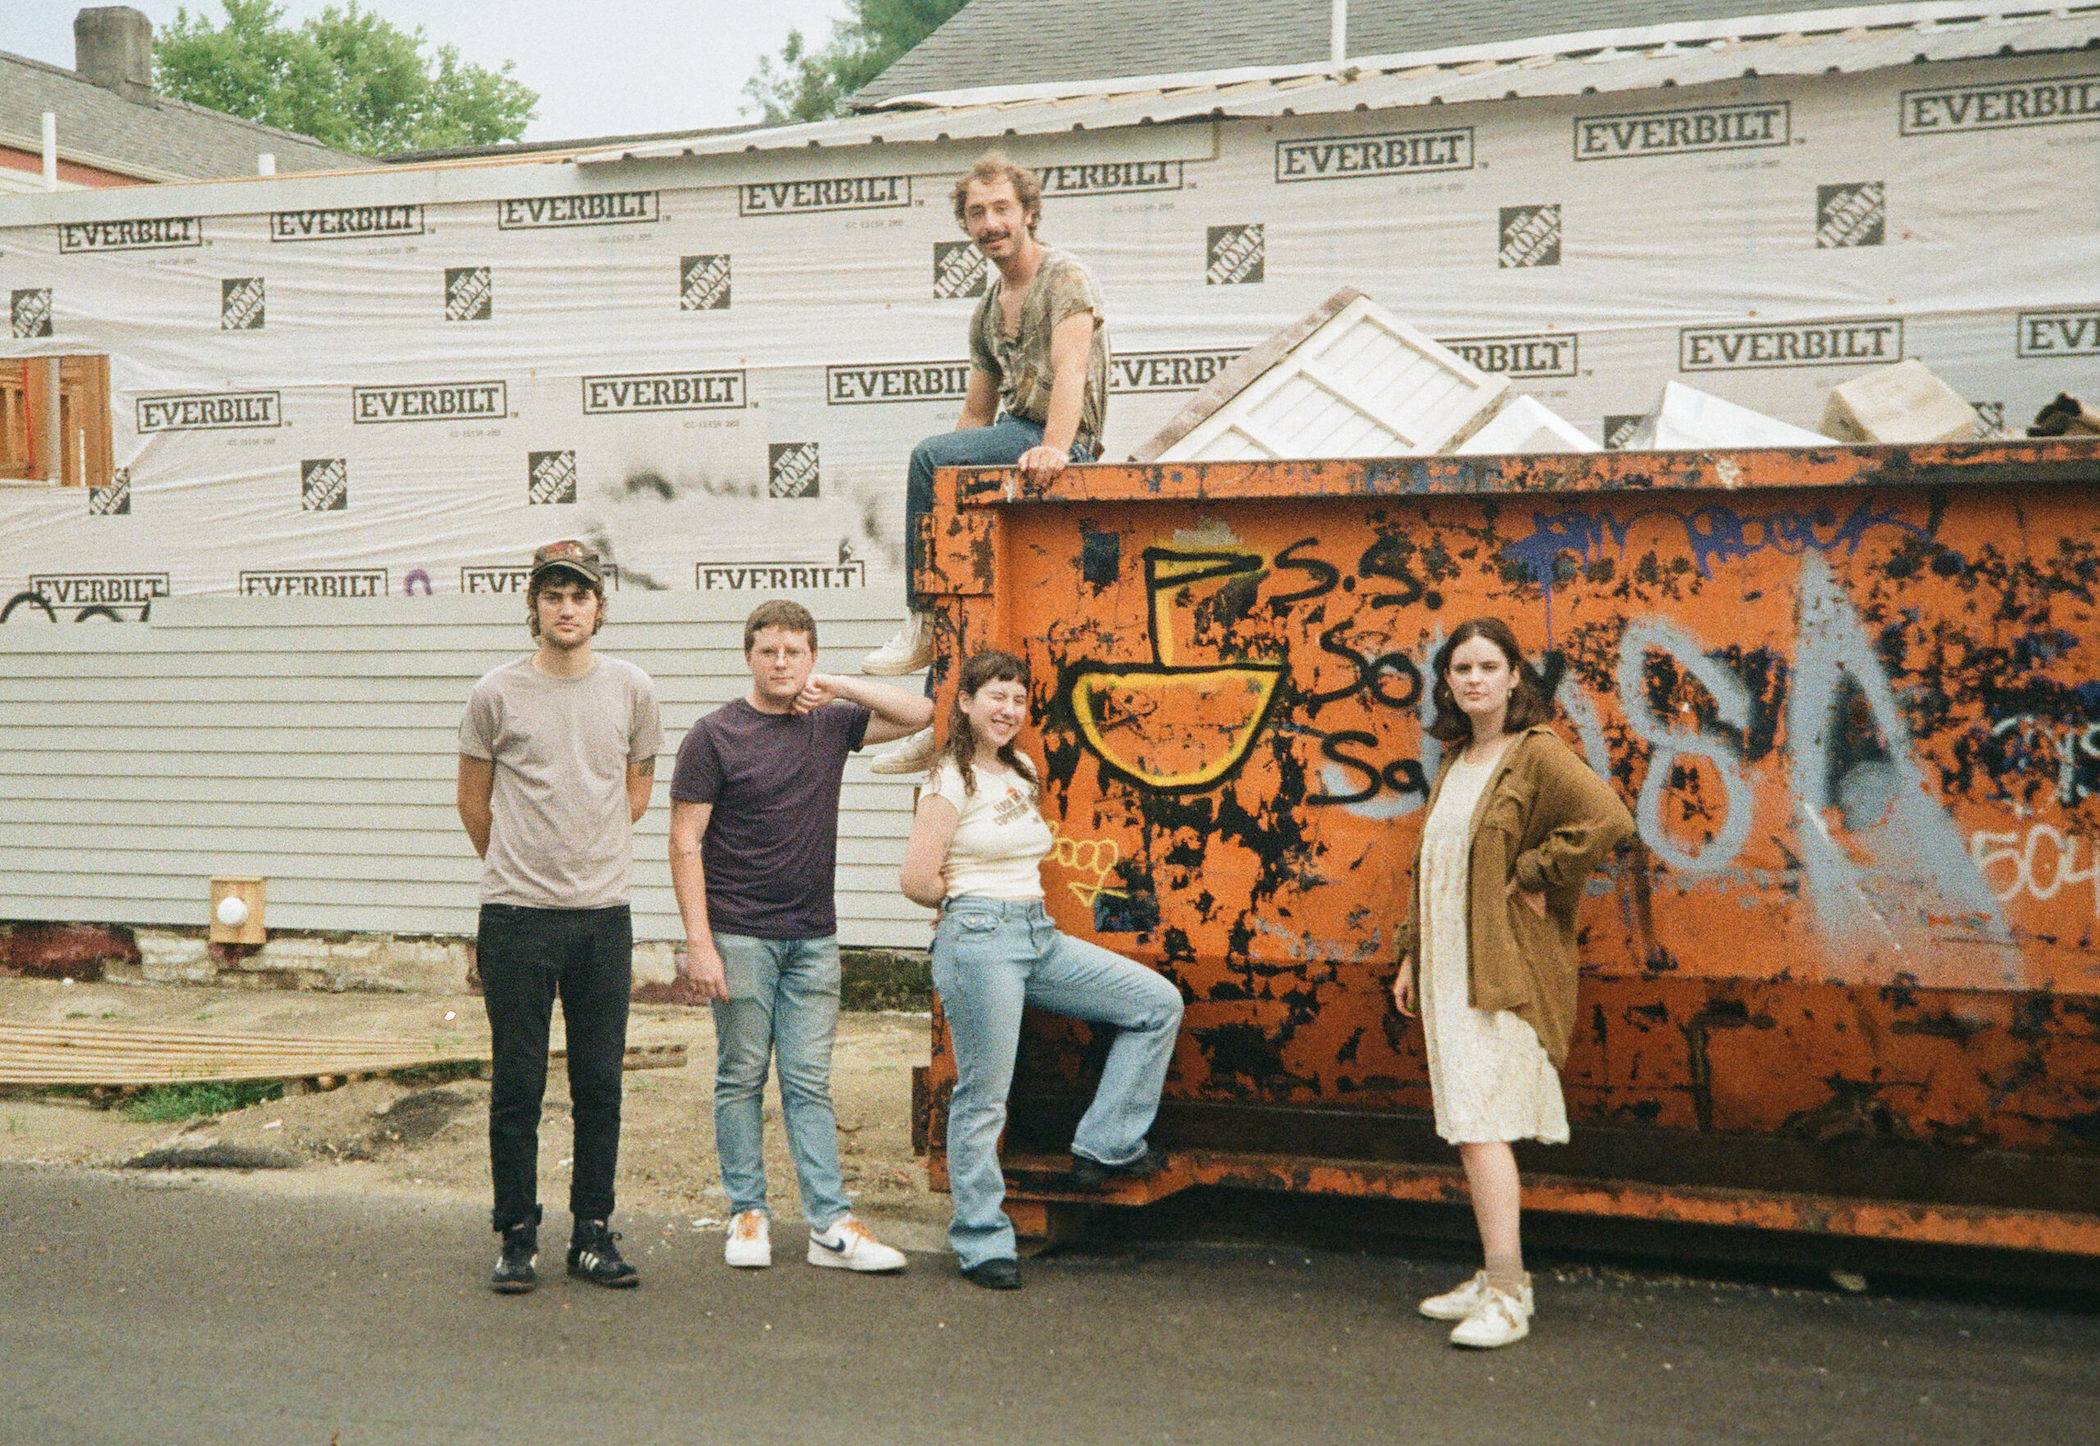 Wednesday pose in front of a graffiti'd dumpster